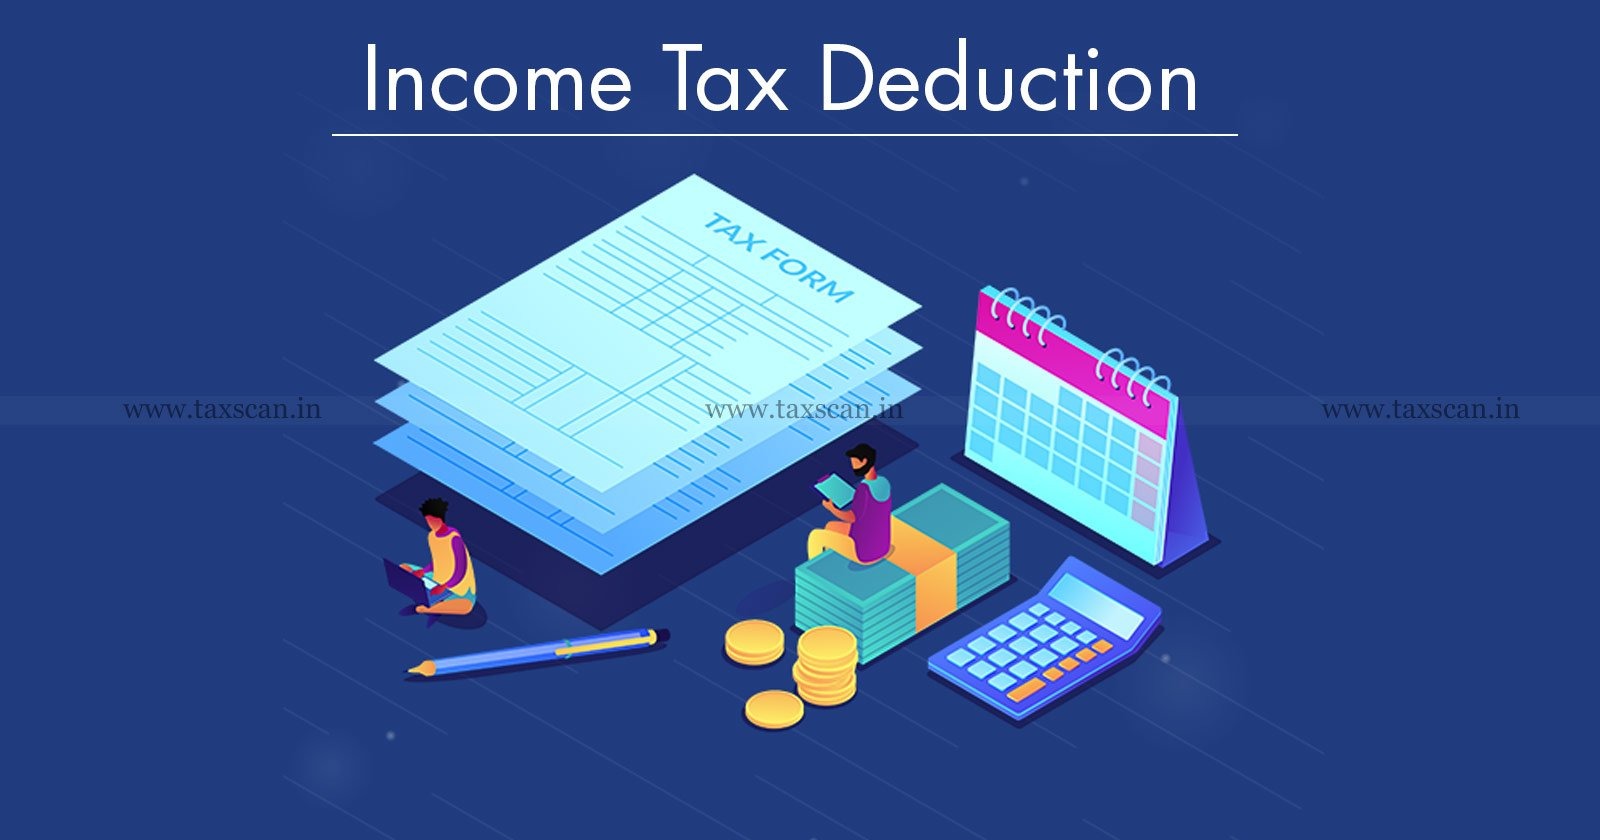 Income Tax Act - ITAT delhi - ection 35 (2) AB of the Income Tax Act - income tax updates - taxscan